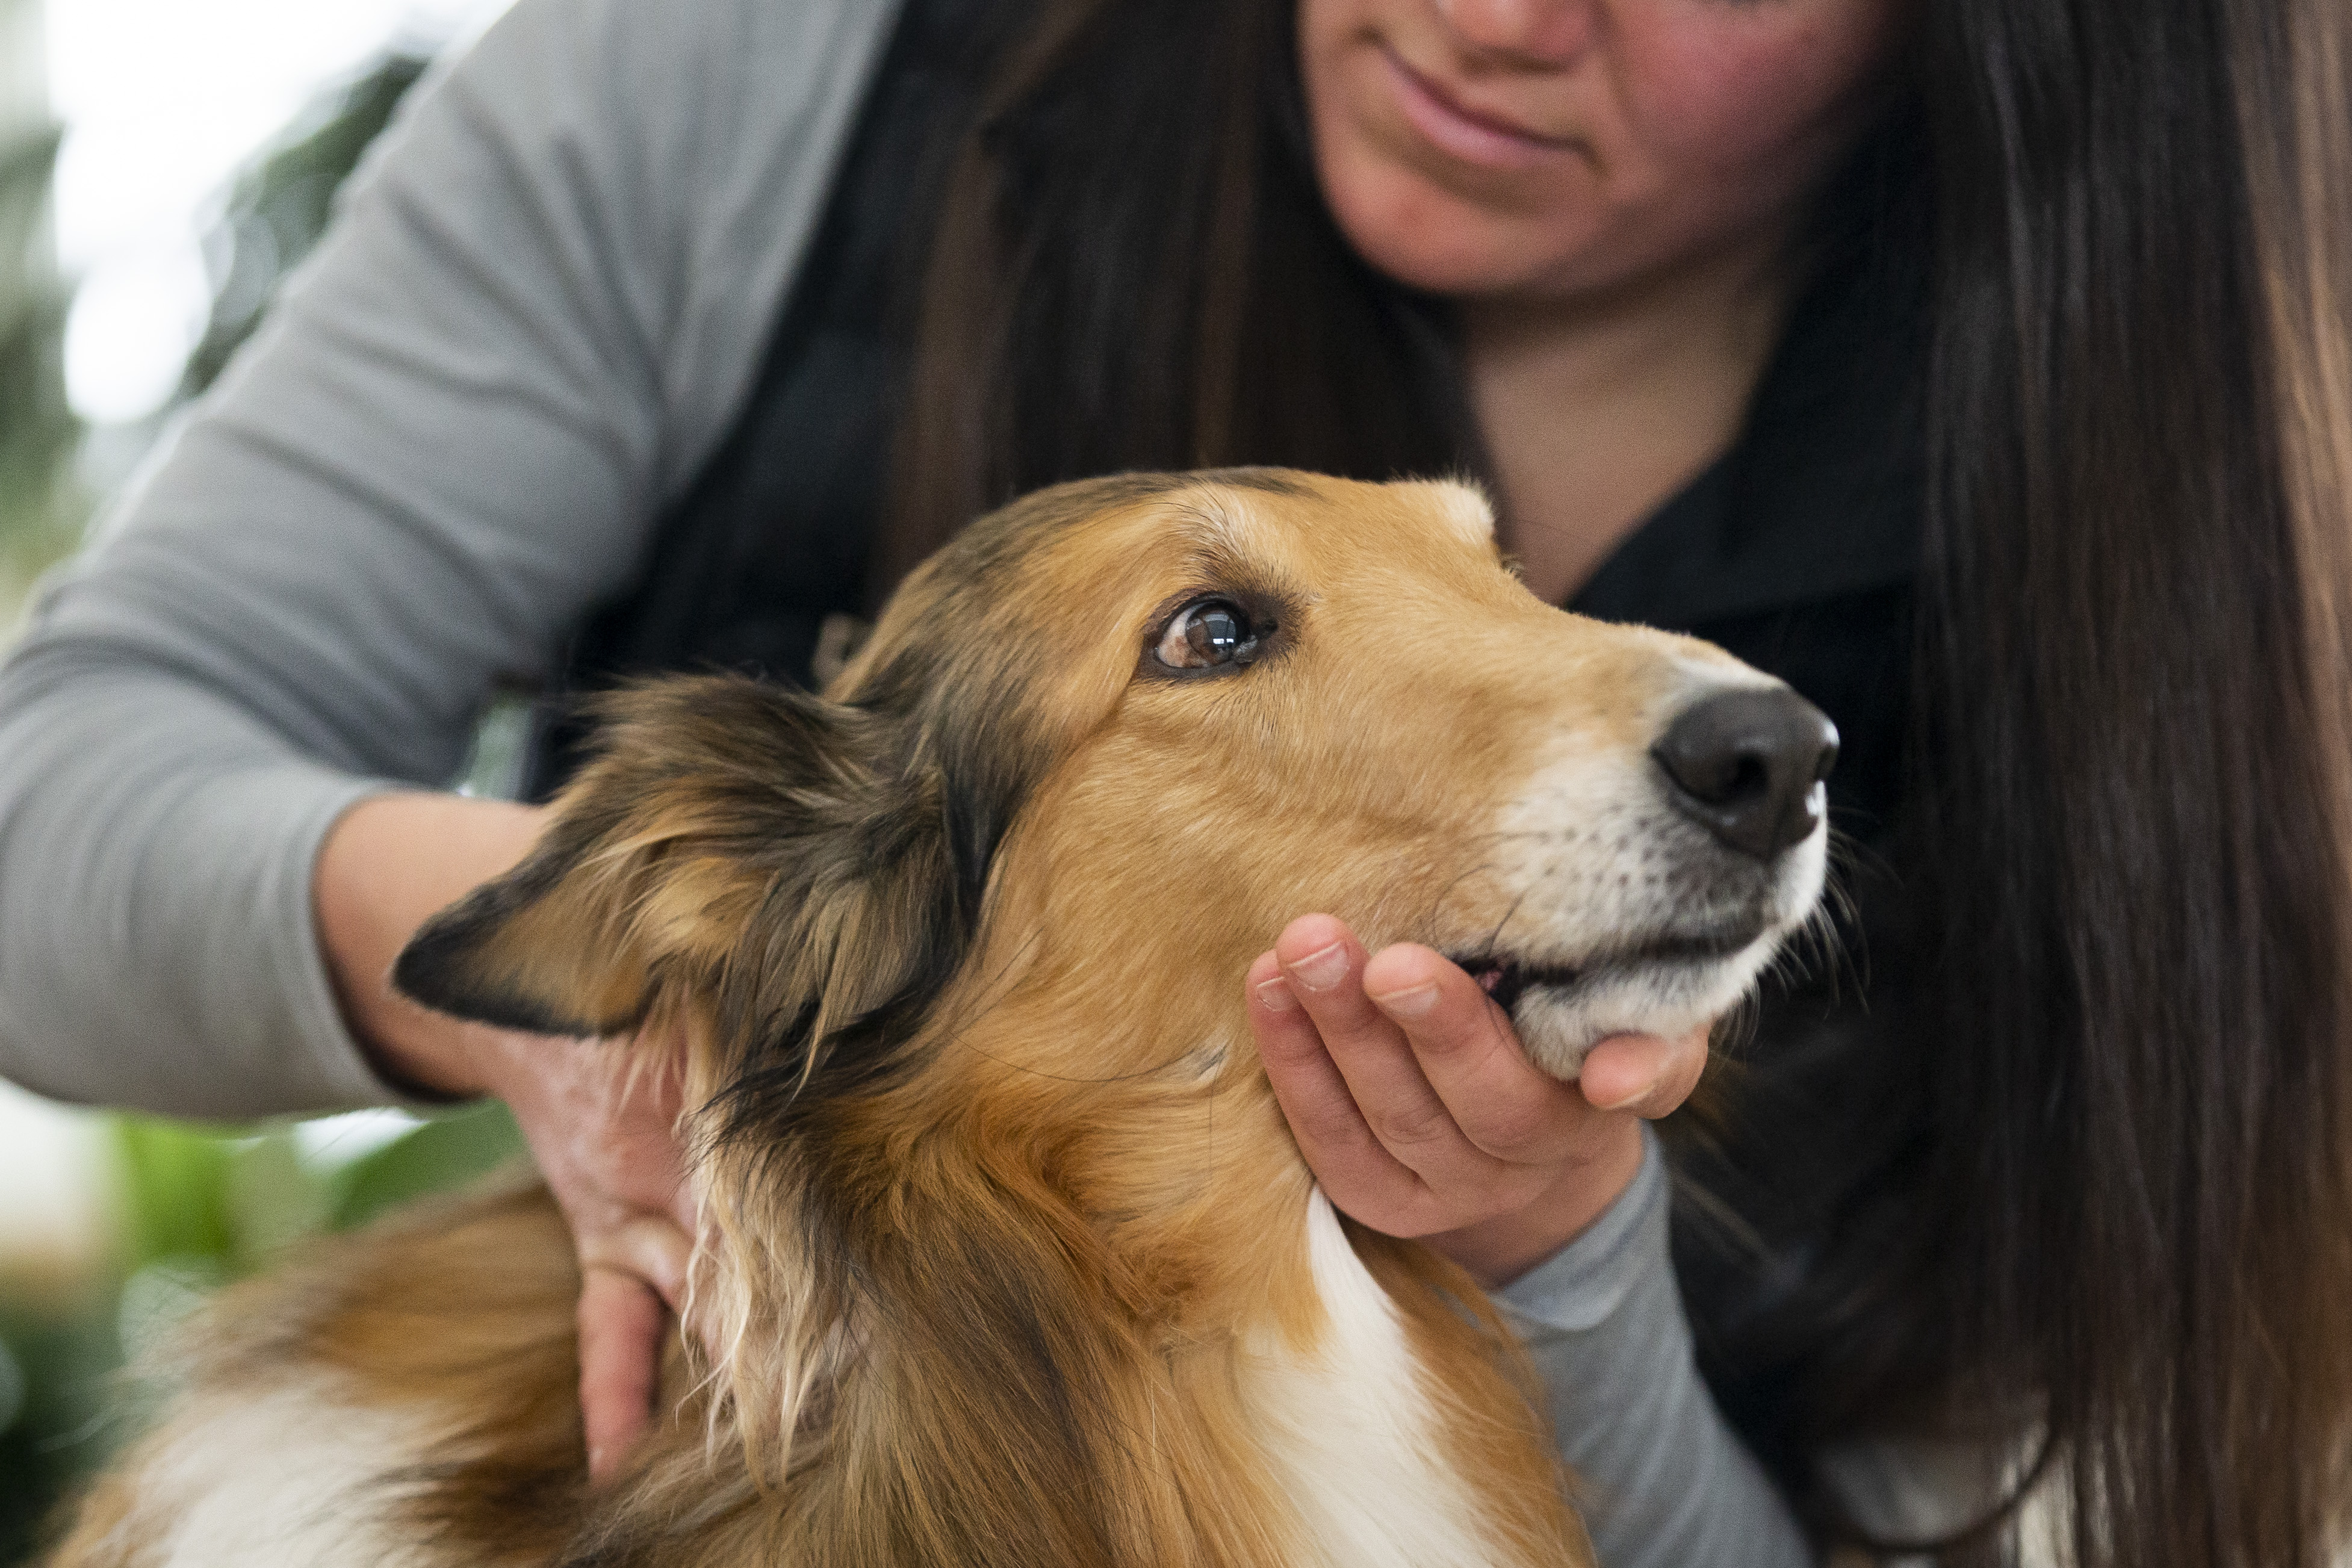 Animal chiropractor finds practice limited by state's veterinary medicine  laws 